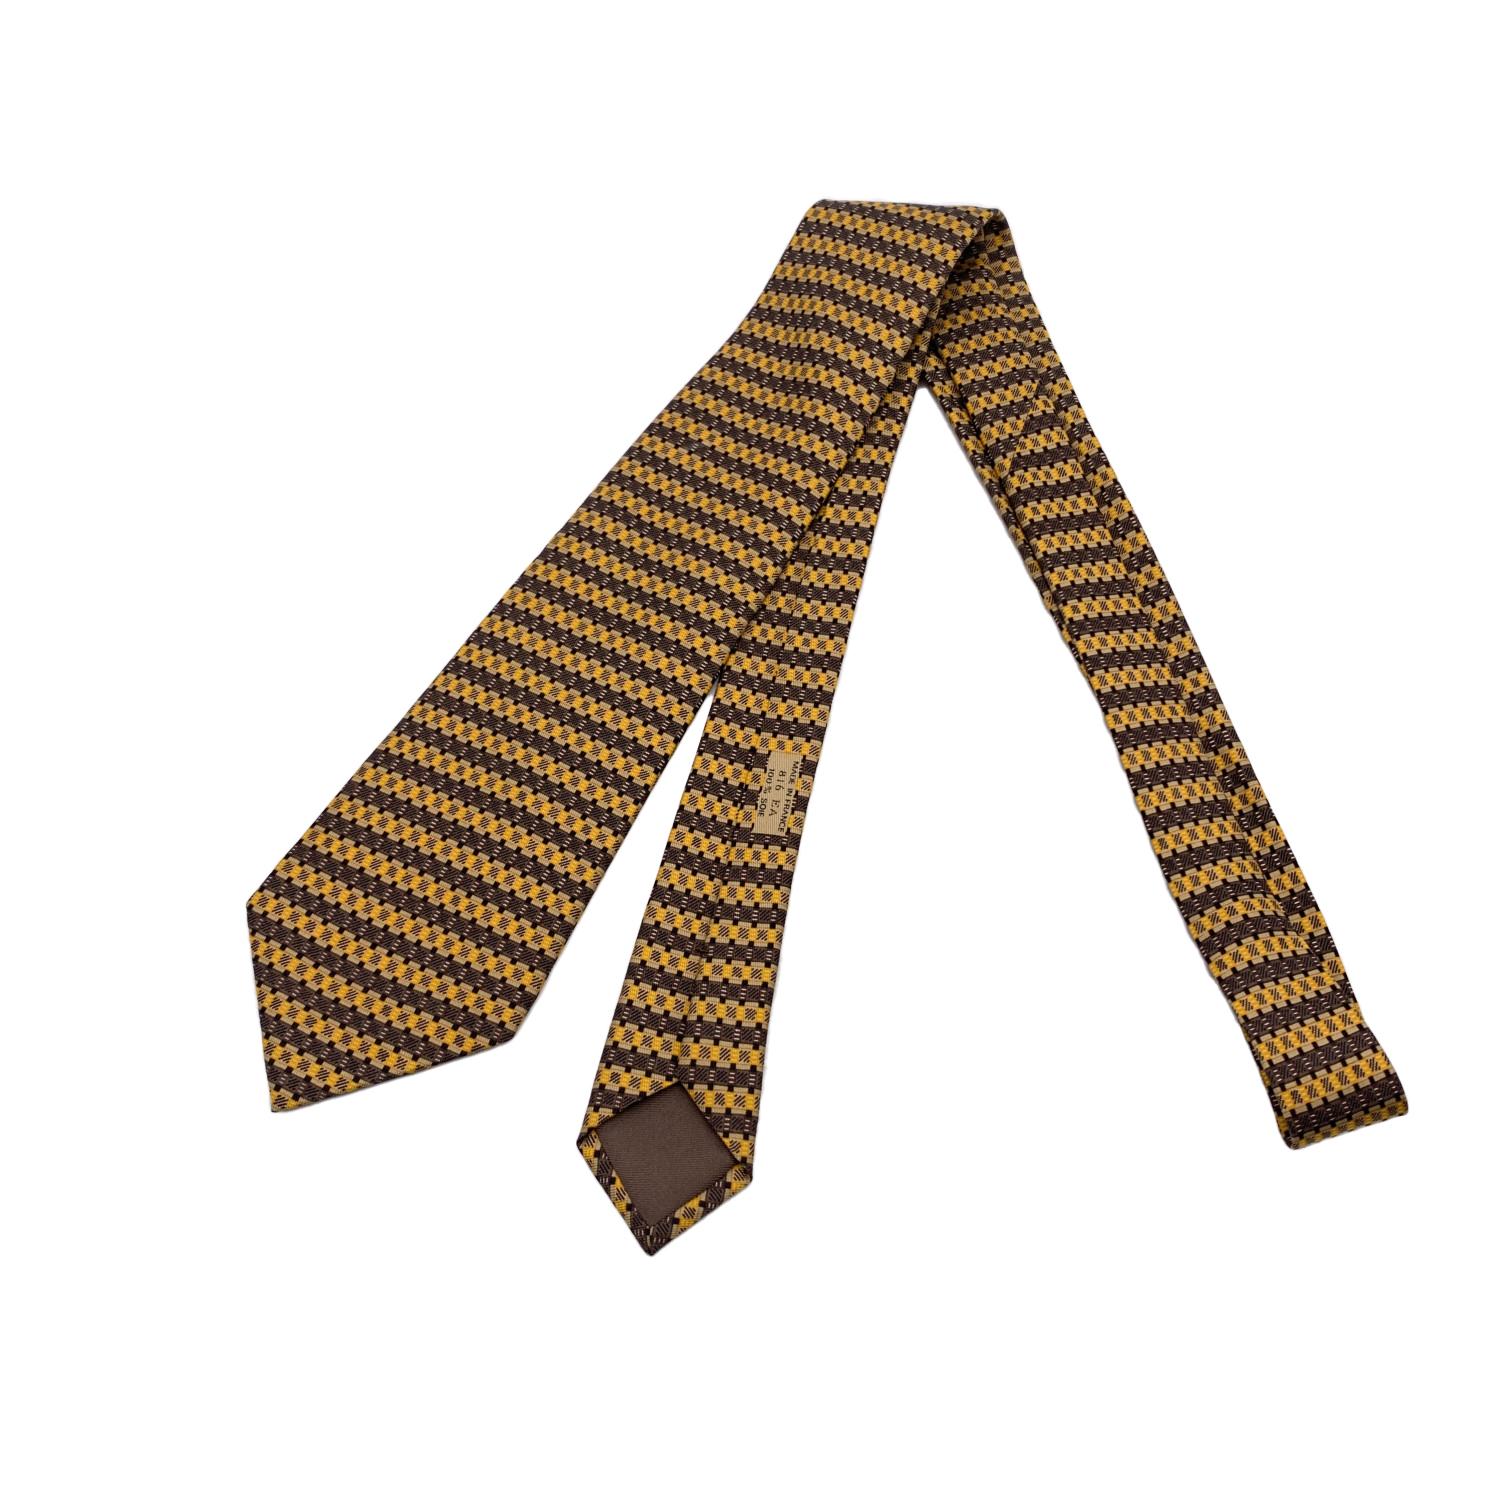 Elegant Hermes Neck Tie, 816 EA, in yellow and brown colors. Composition: 100% Silk. Hermes composition tag attached. 'HERMES Paris' with copyright symbol printed on the back. Made in France. Total length: 59.5 inches - 151.2 cm. Max width: 3.5